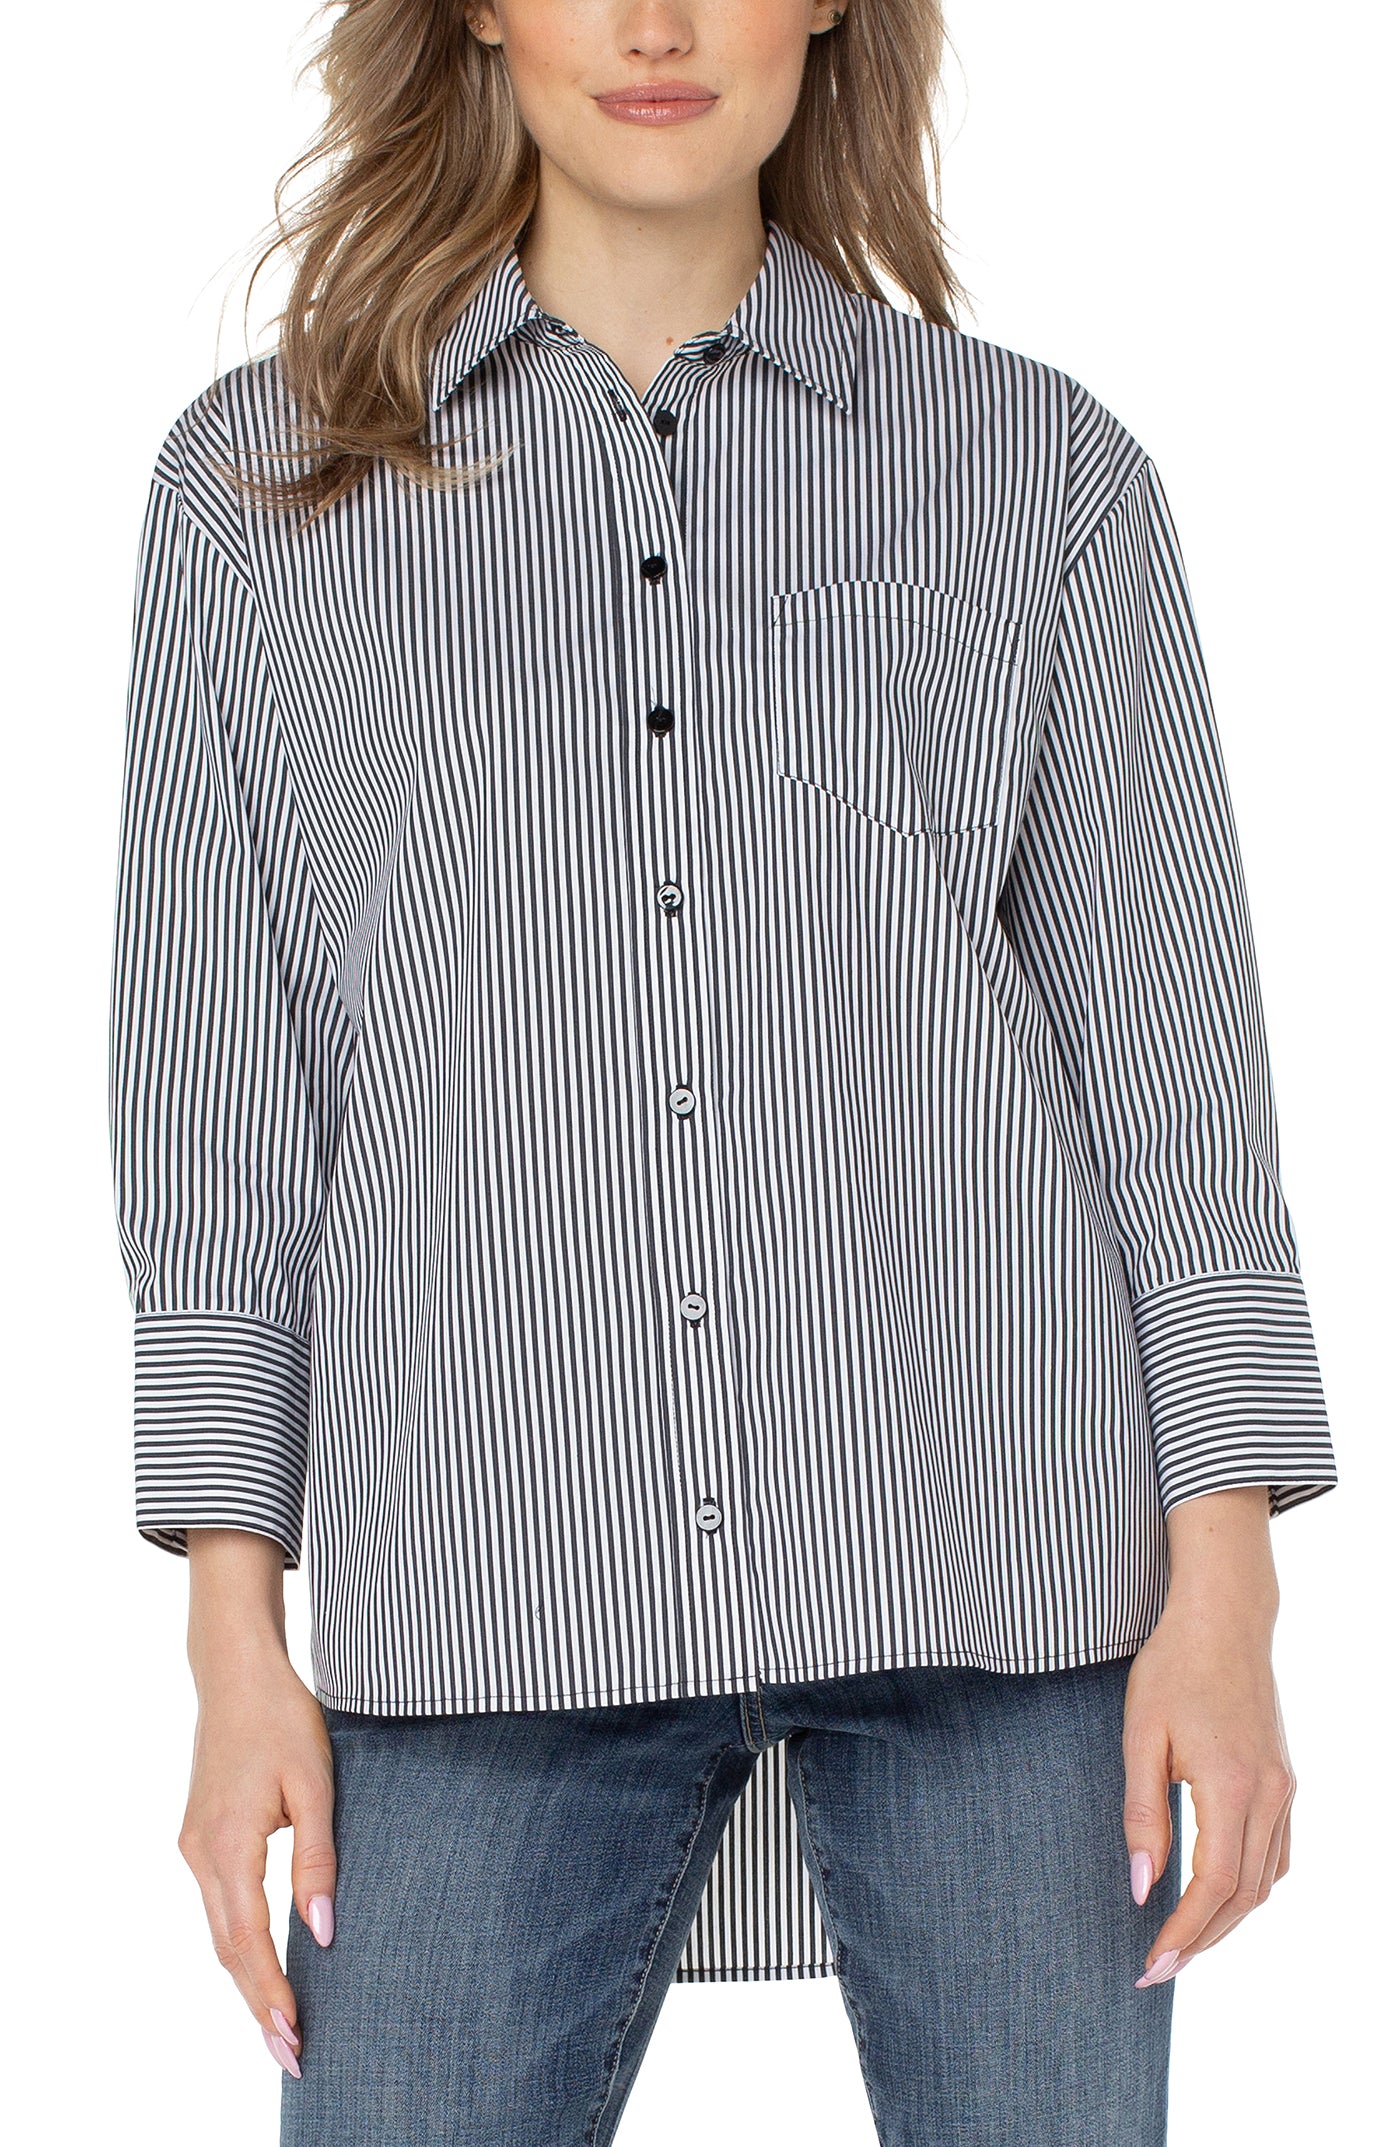 Liverpool Oversized Classic Button Up Top - Black/White Stripe